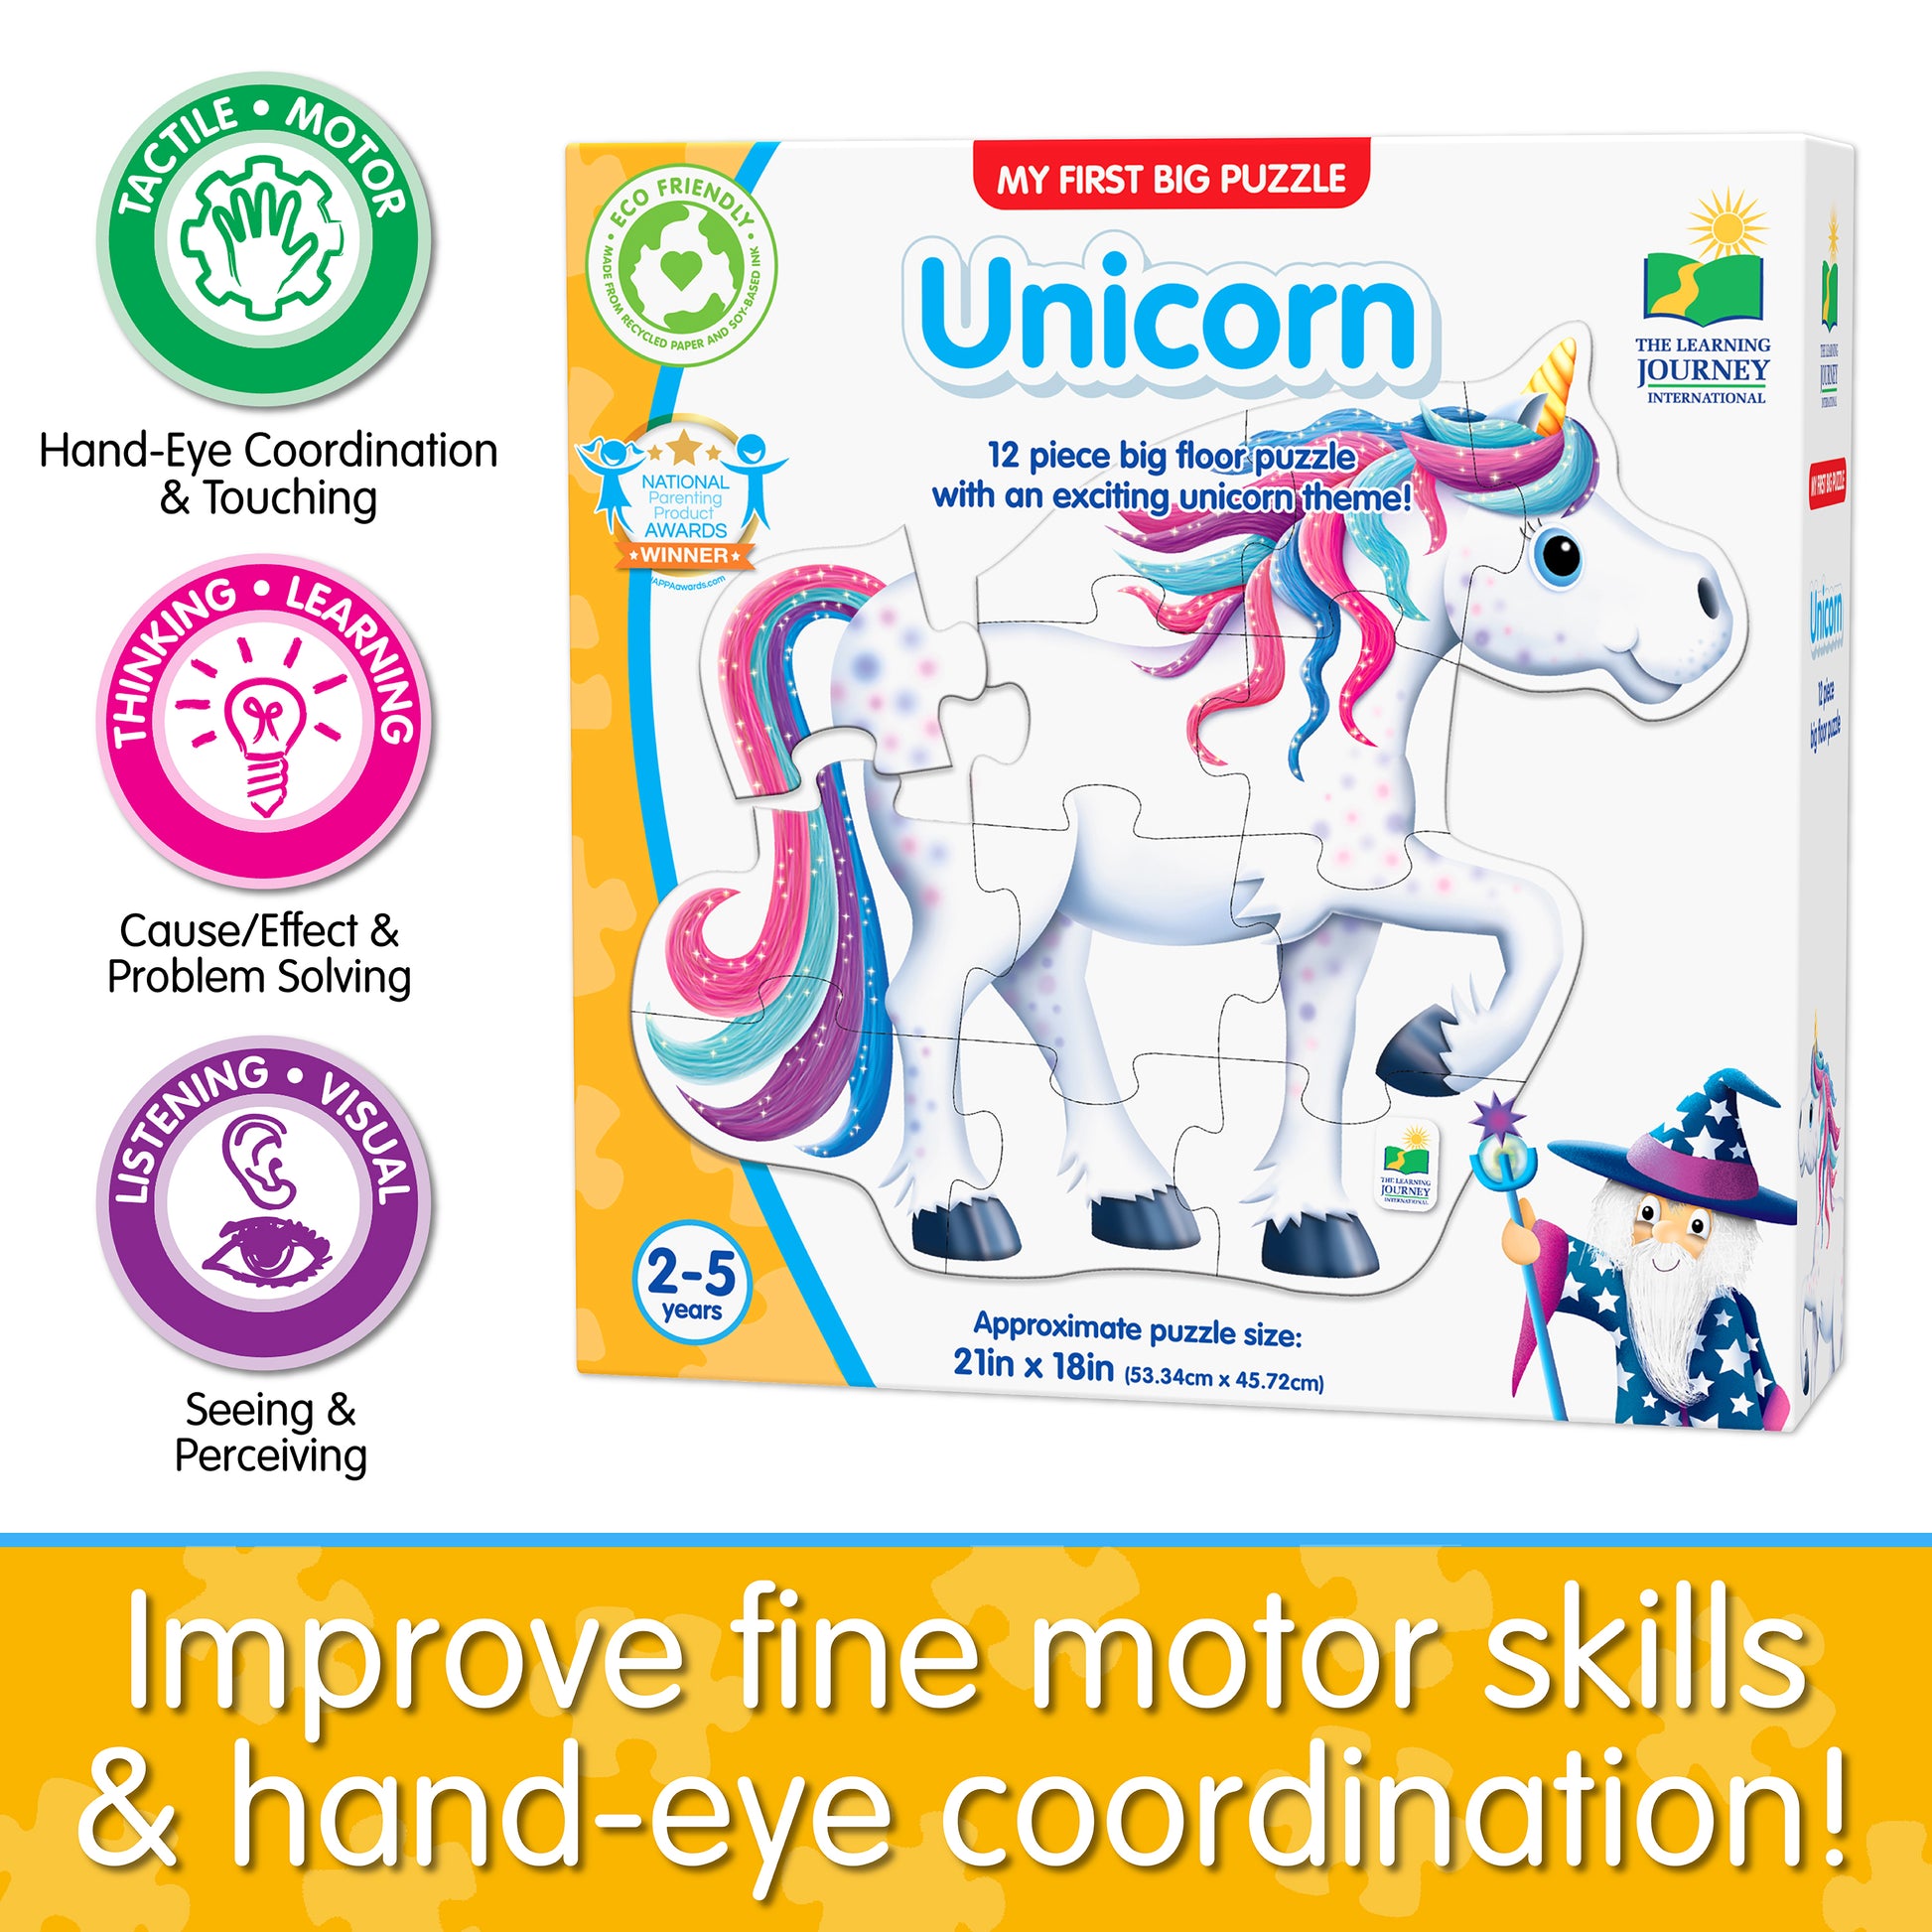 Infographic about My First Big Puzzle - Unicorn's educational benefits that says, "Improve fine motor skills and hand-eye coordination!"